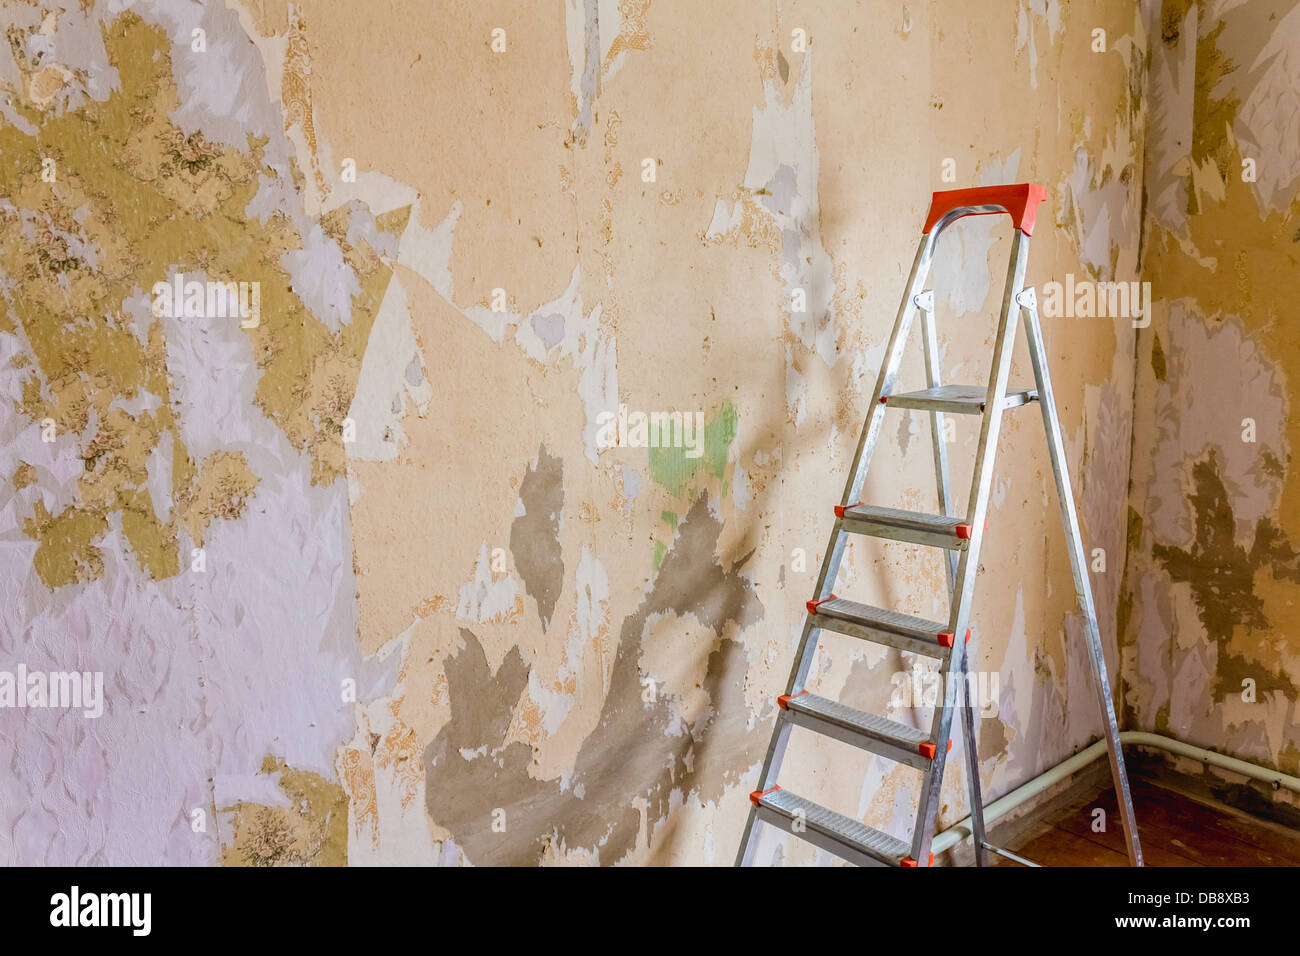 Old wallpapers and metallic ladder Stock Photo